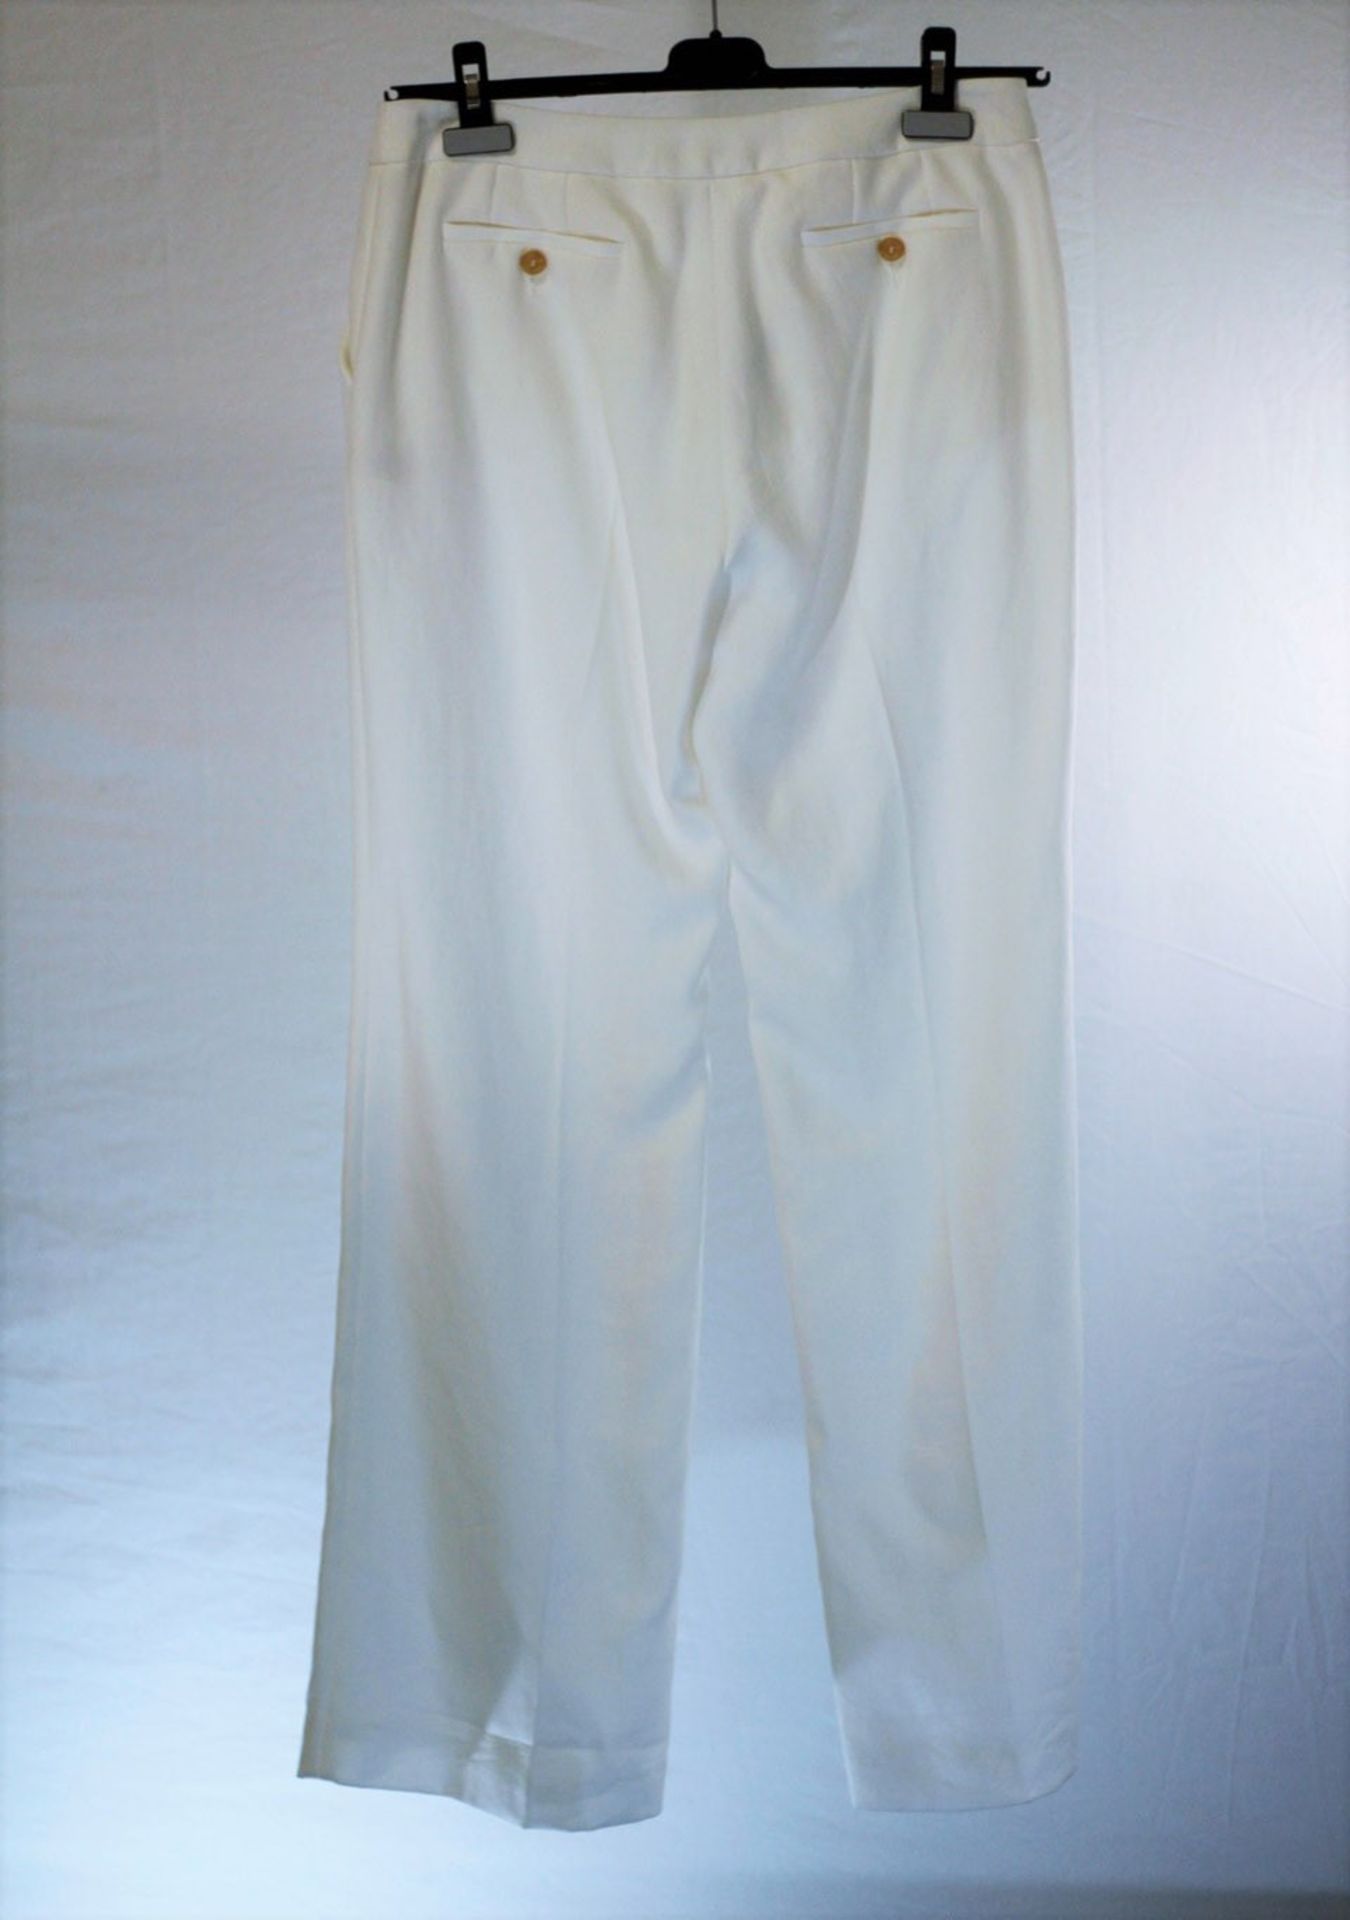 1 x Agnona White Trousers - Size: 16 - Material: 100% Ramie. Lining 52% Viscose, 48% Cotton - From a - Image 3 of 7